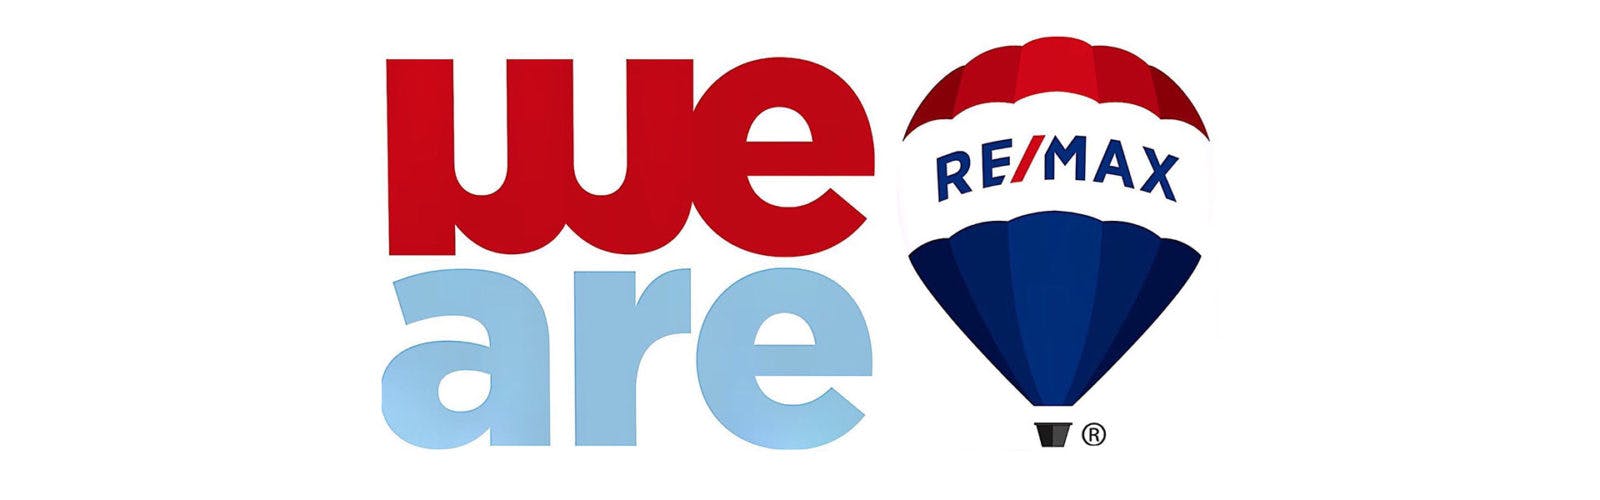 we are remax